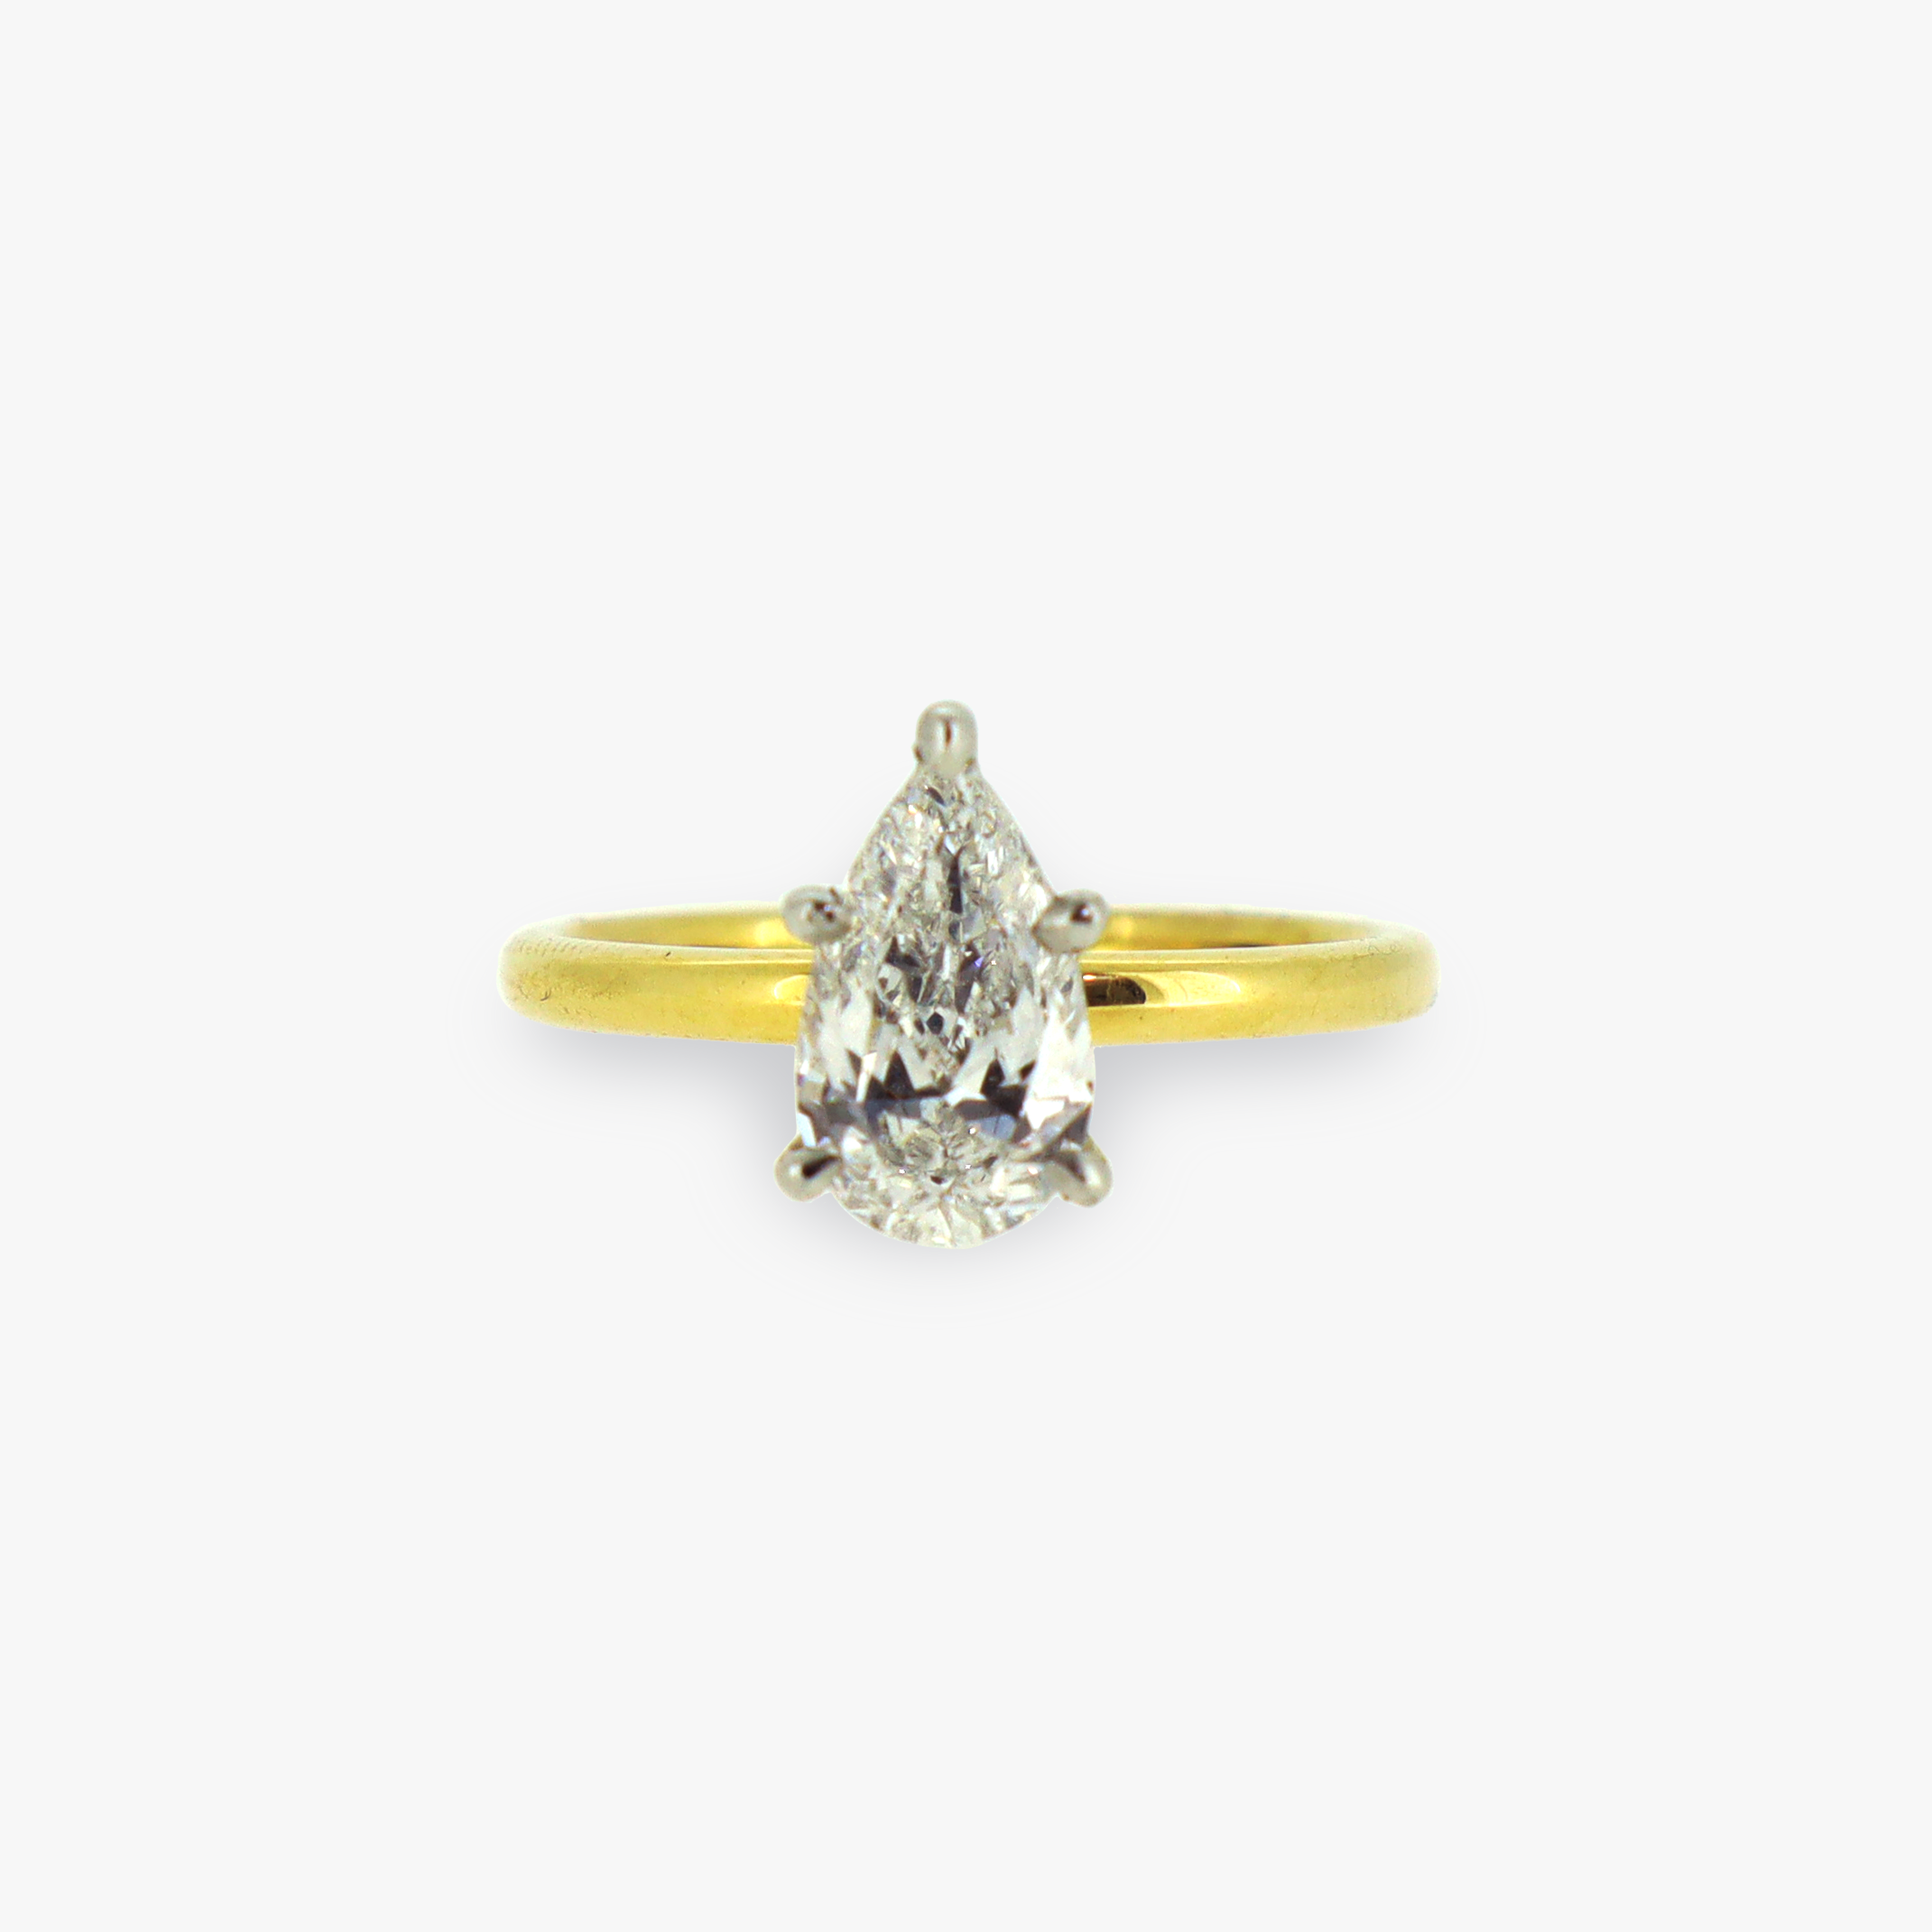 PAIGE | 1.05CT PEAR CUT SOLITAIRE ENGAGEMENT RING